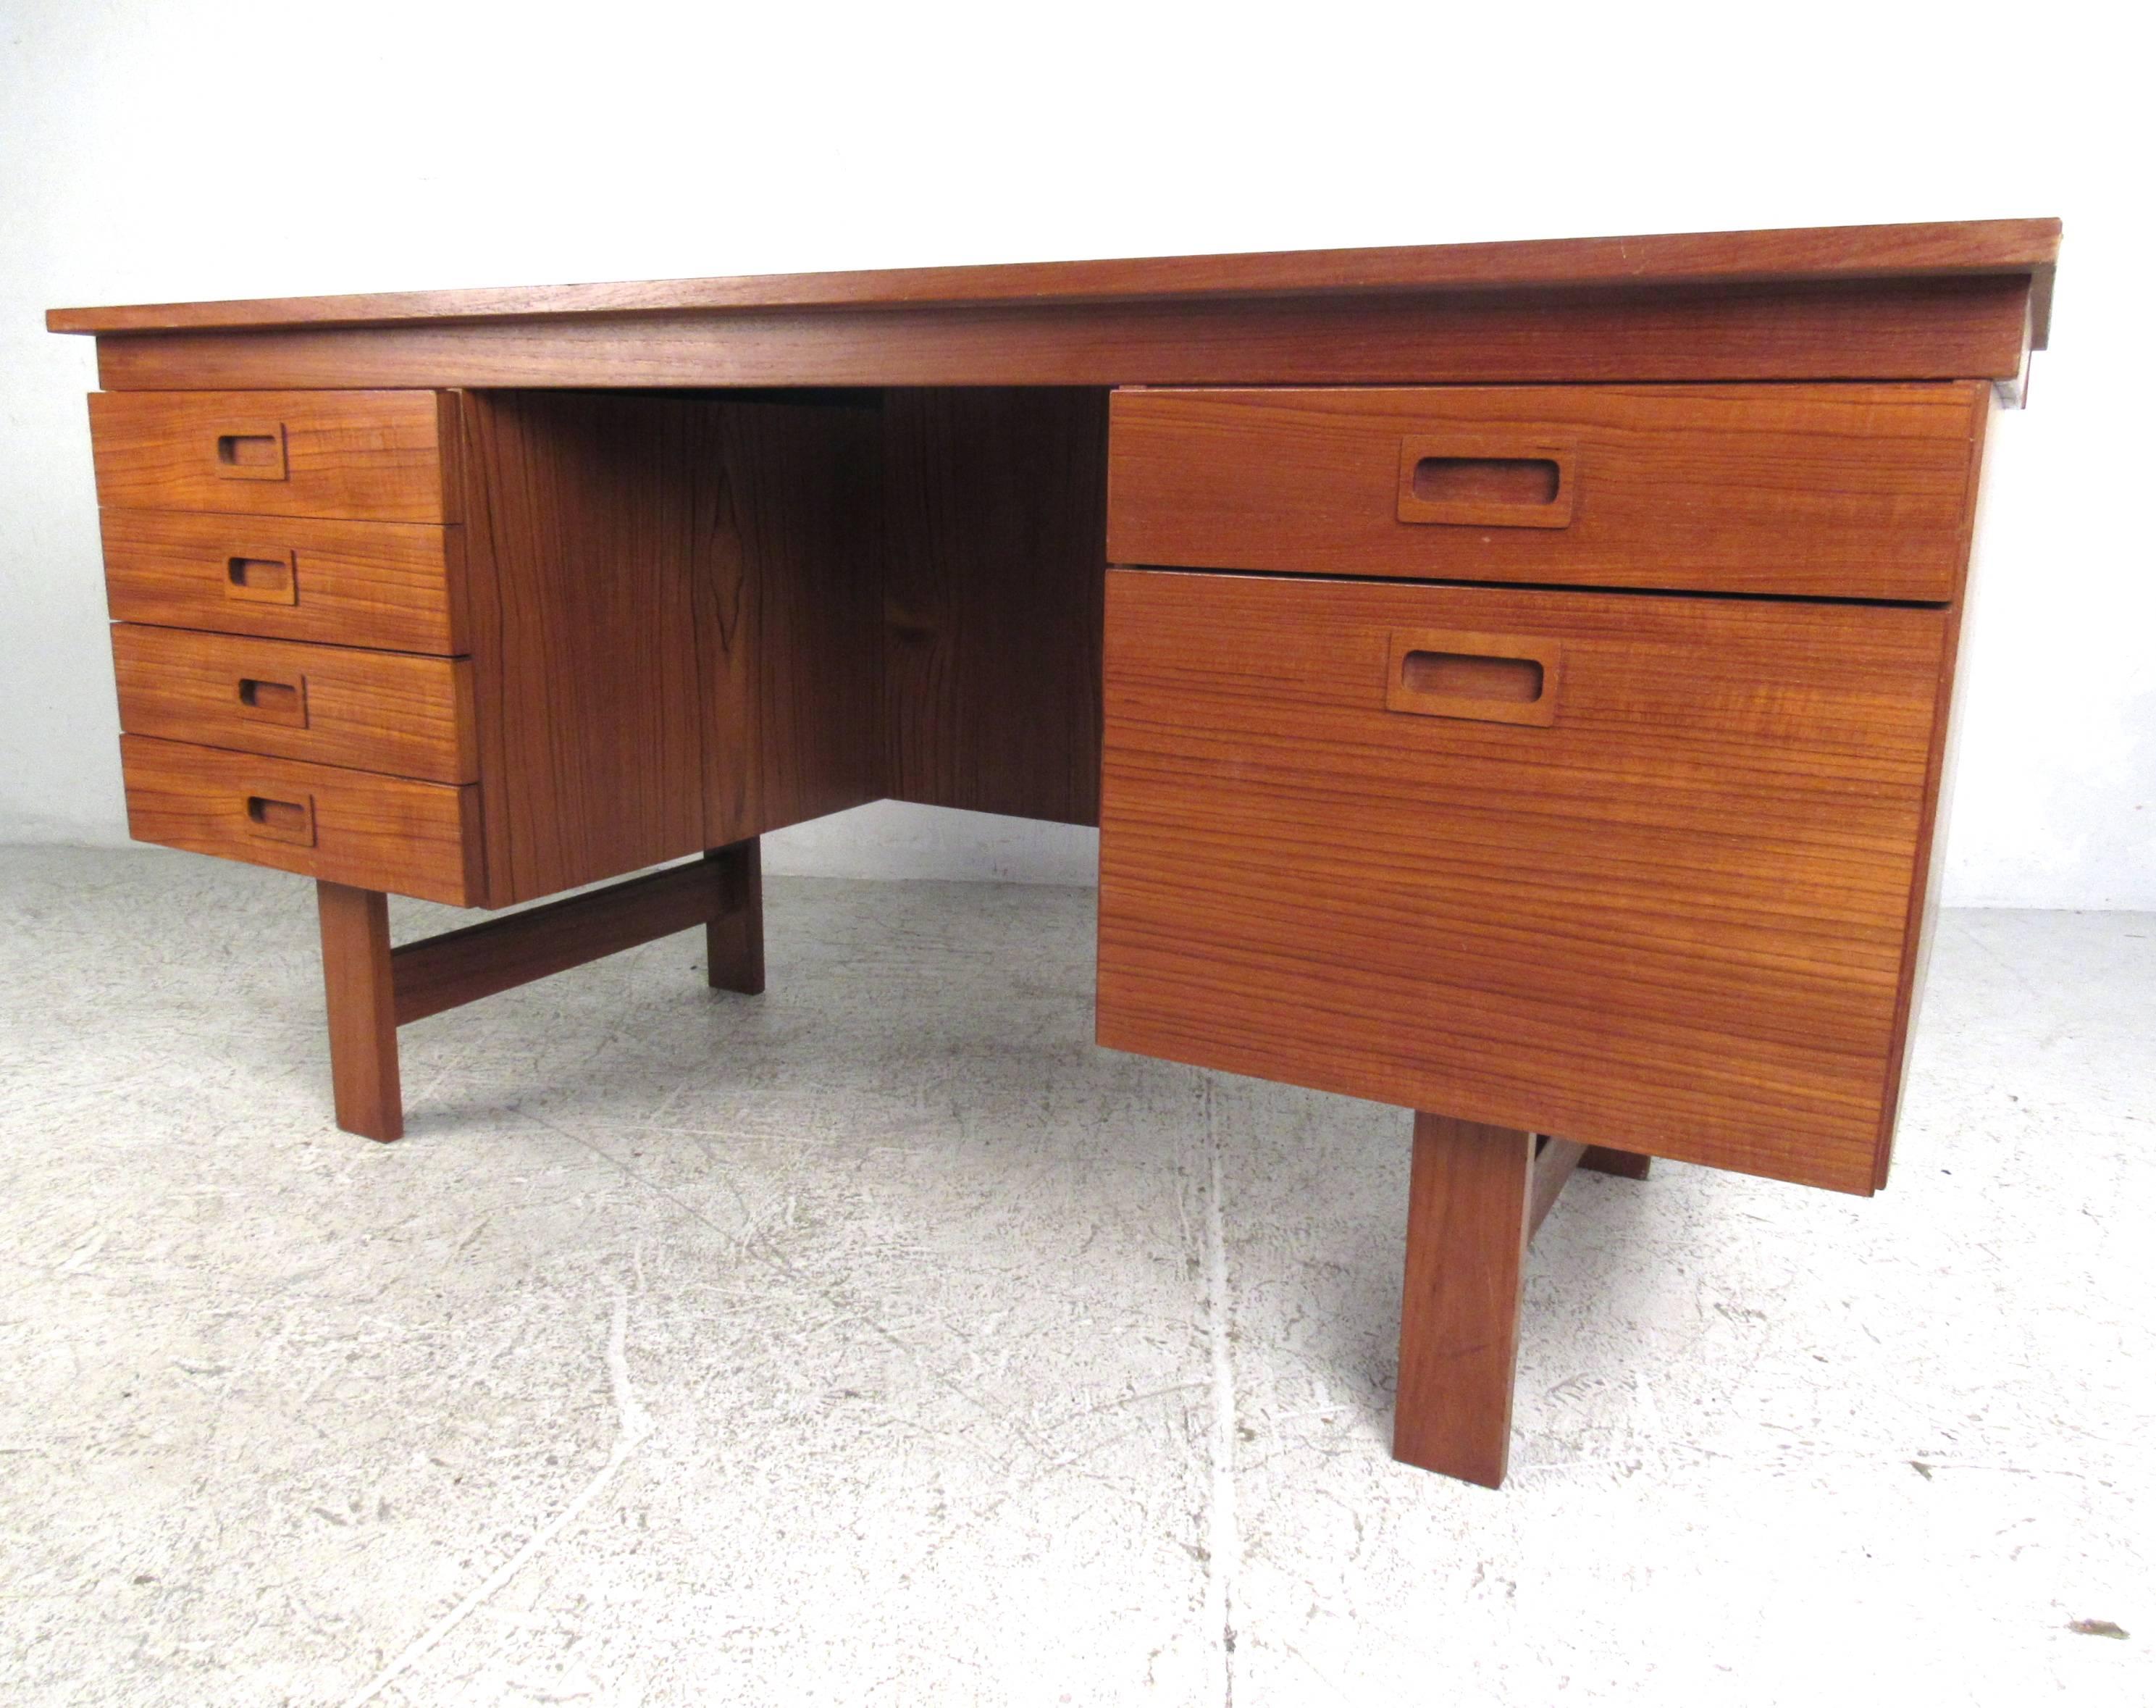 This Danish modern writing desk features a rich natural teak finish, spacious workspace, and plenty of drawers for storage. Manufactured by Vi-Ma mobler in Denmark, the mid-century style of the desk makes it a wonderful addition to any modern